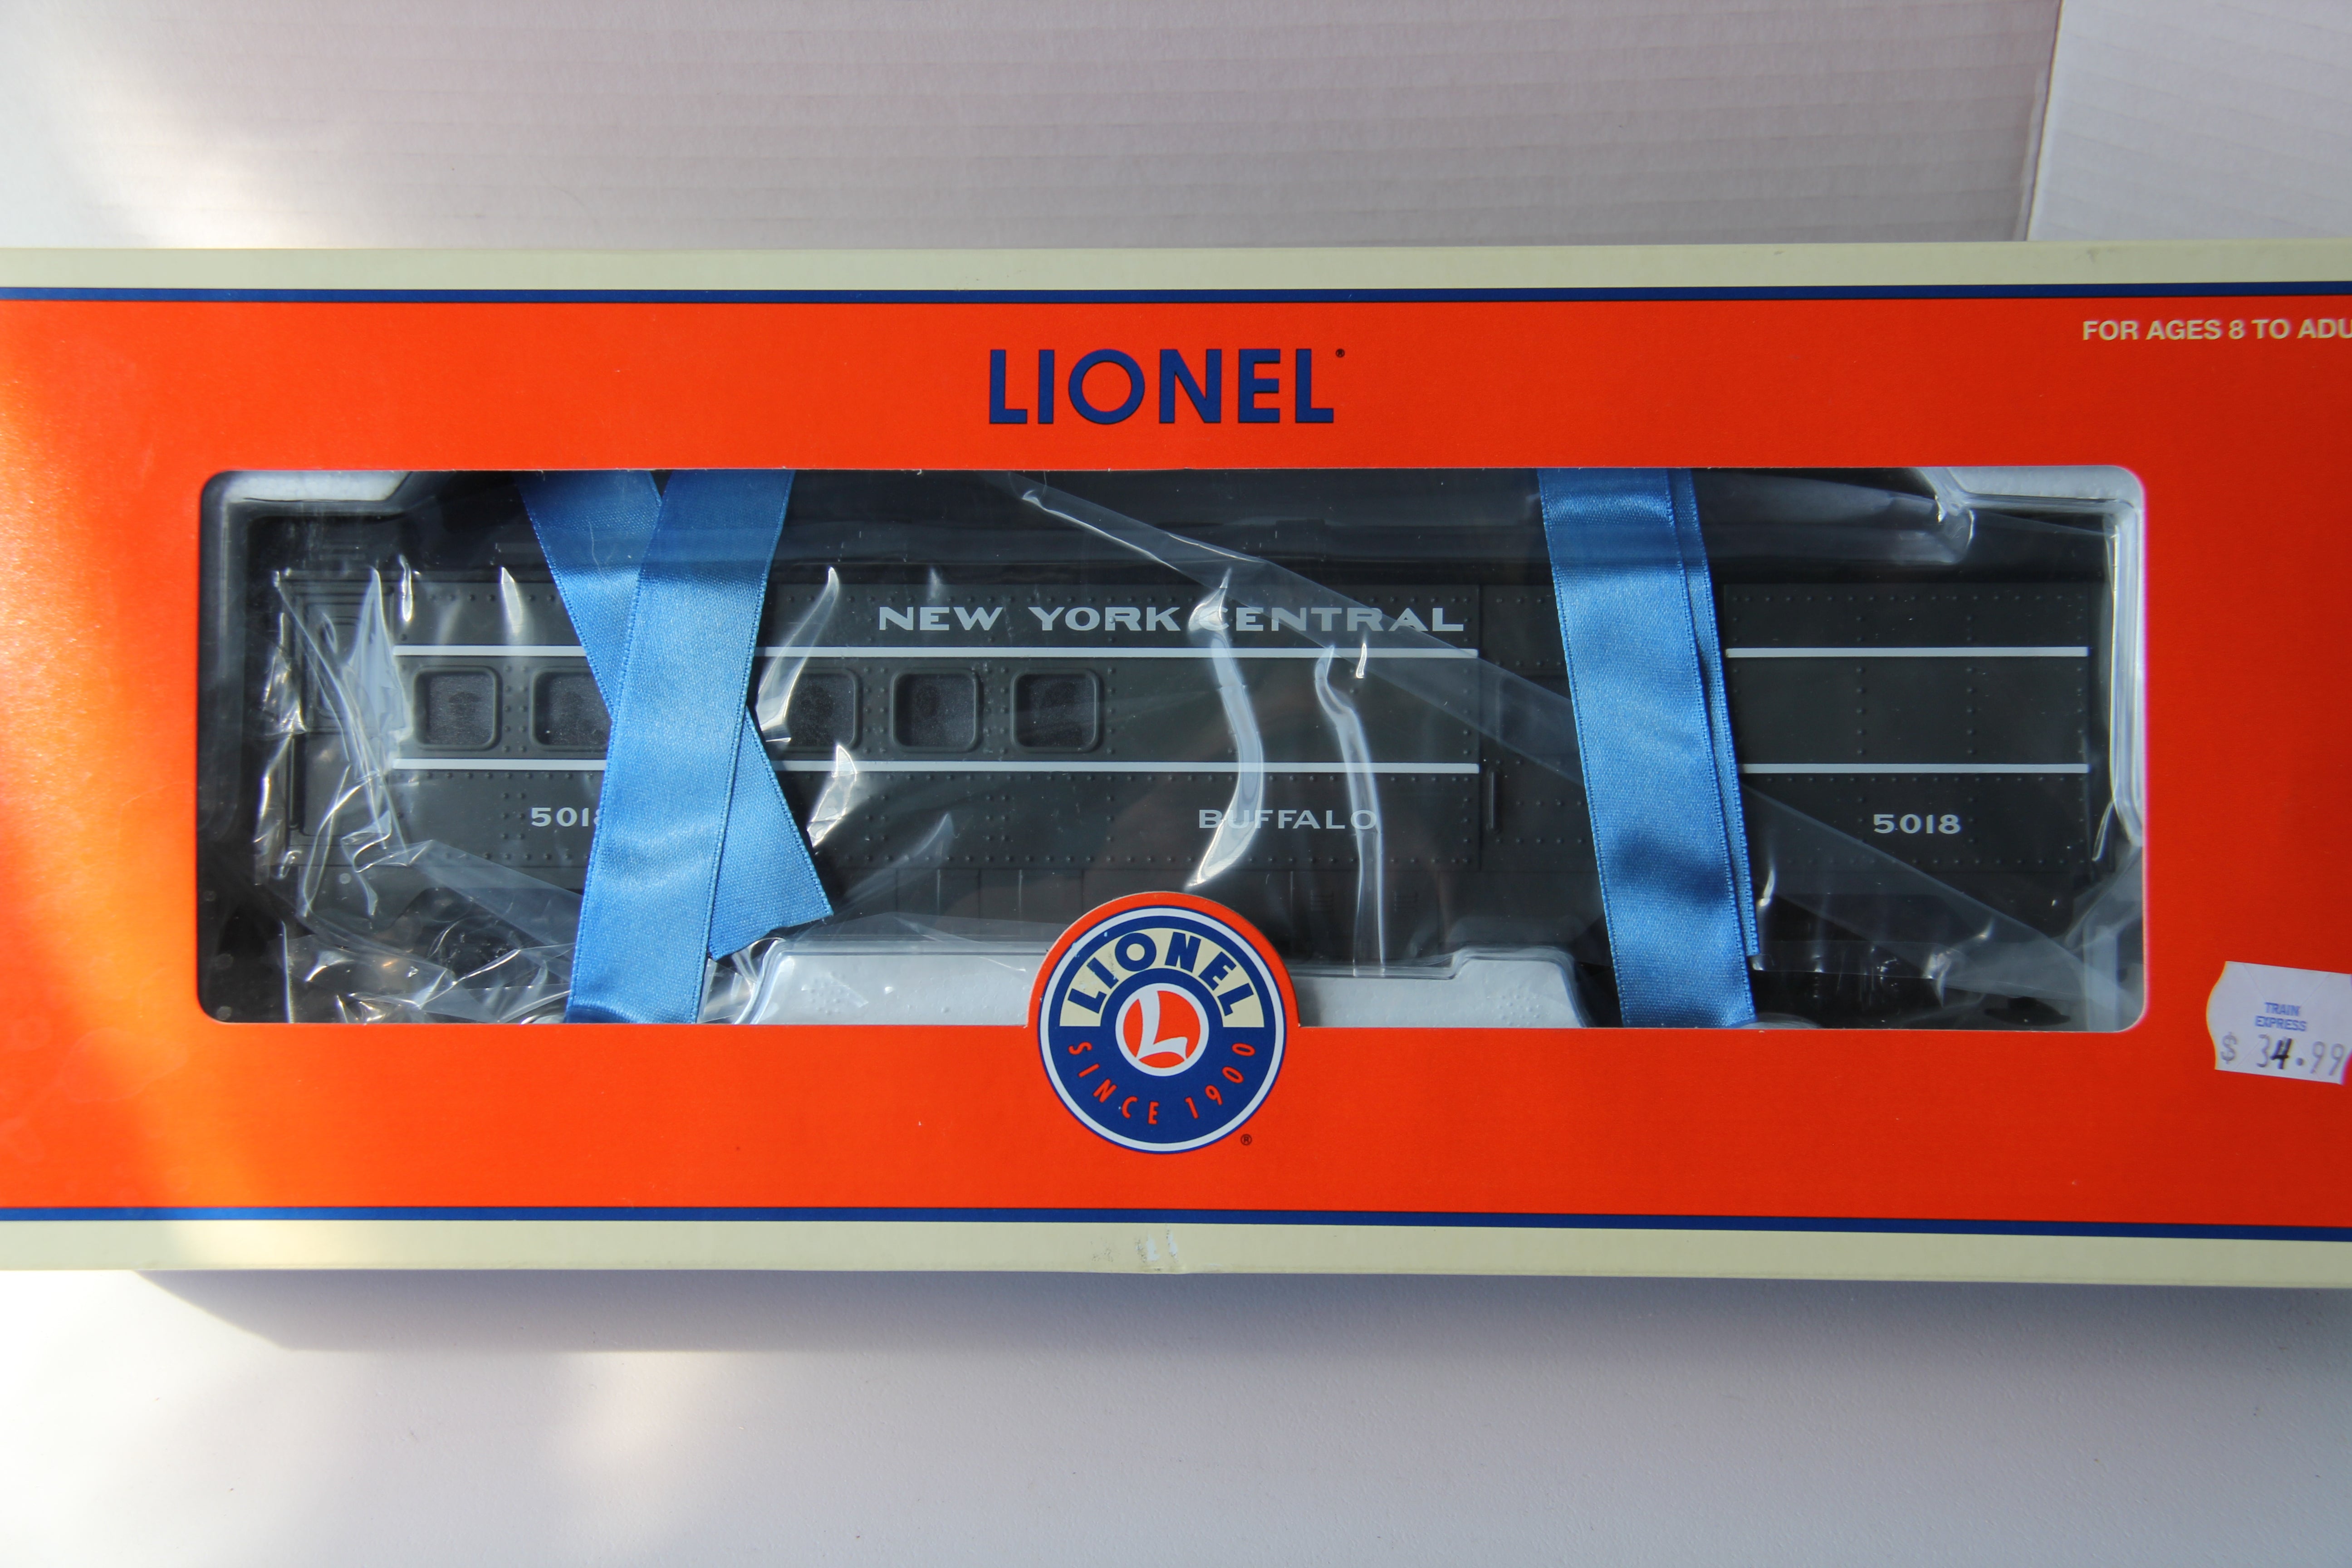 Lionel 6-25142 NYC Combo Car-Second hand-M2797